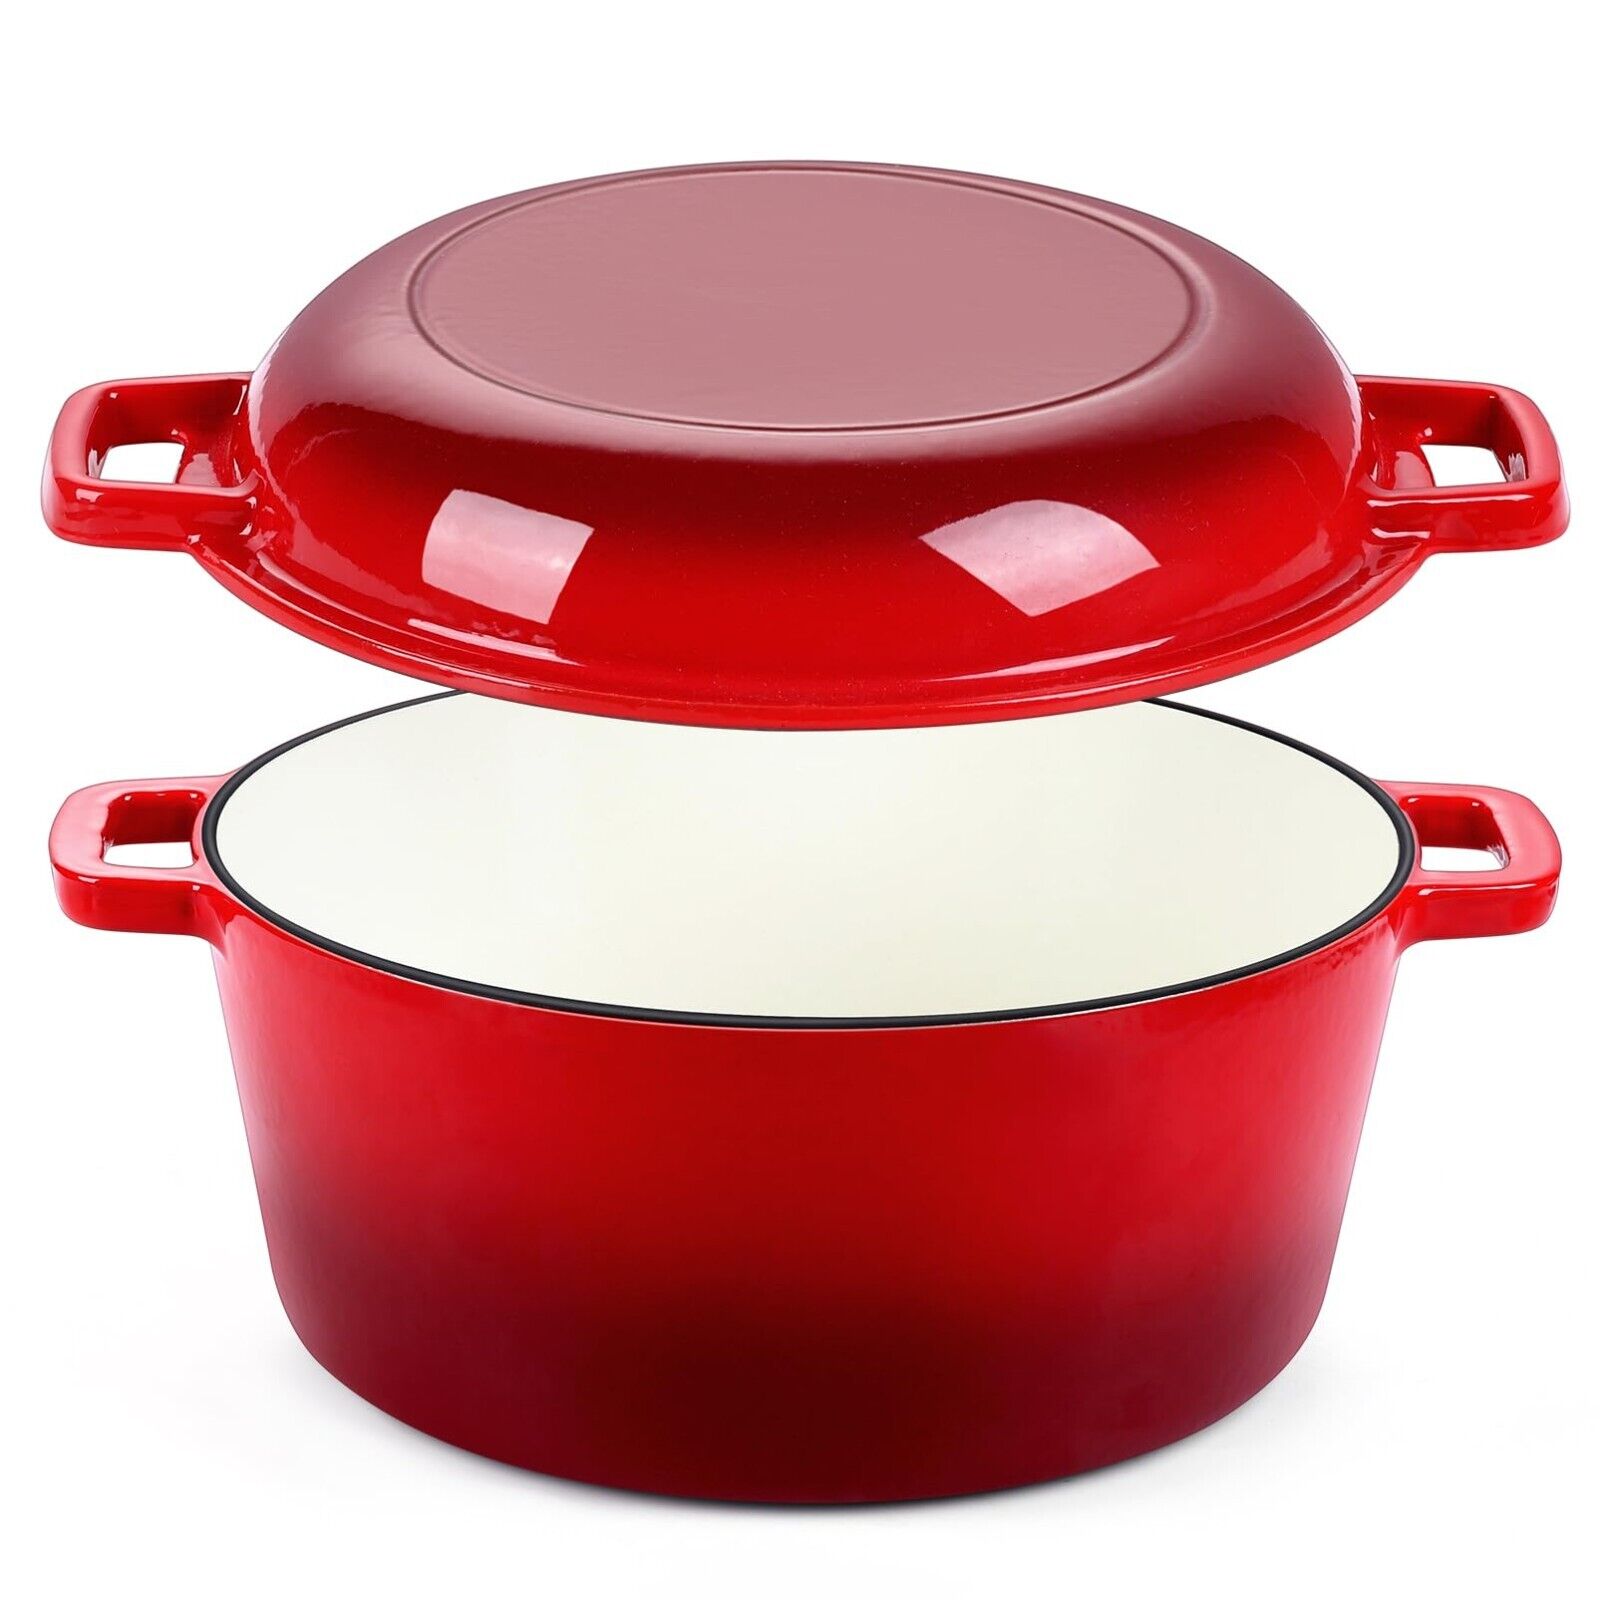 Red Enameled Dutch Oven Pot for Bread Baking, 2 in 1 Round 5Qt Cast Iron Dutch